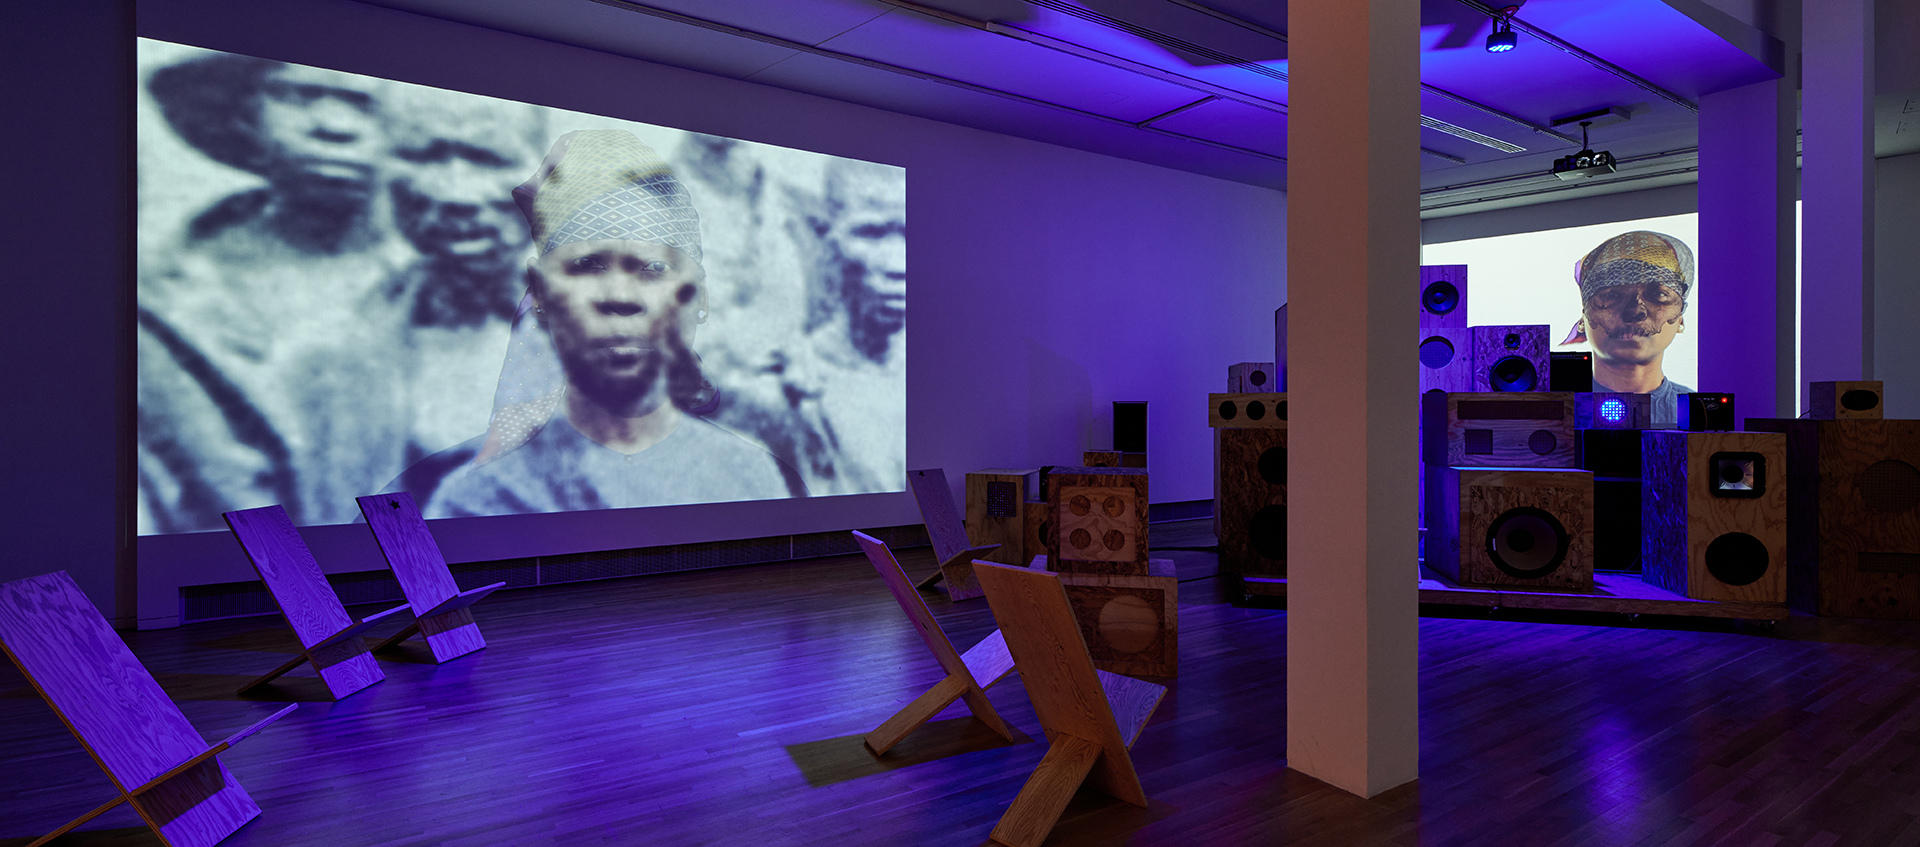 Gallery space lit with purple light. Multisized wooden speakers are stacked on top of each other in the back right corner. Behind them is a projection of nora chipaumire with a black scull covering her face and pattered headscarf. There are wooden chairs scattered throughout the wooden gallery floors to the left of the speaker system. Above them is a larger projection featuring a black-and-white photo of a group of African people; nora’s face photoshopped in color over someone else’s.